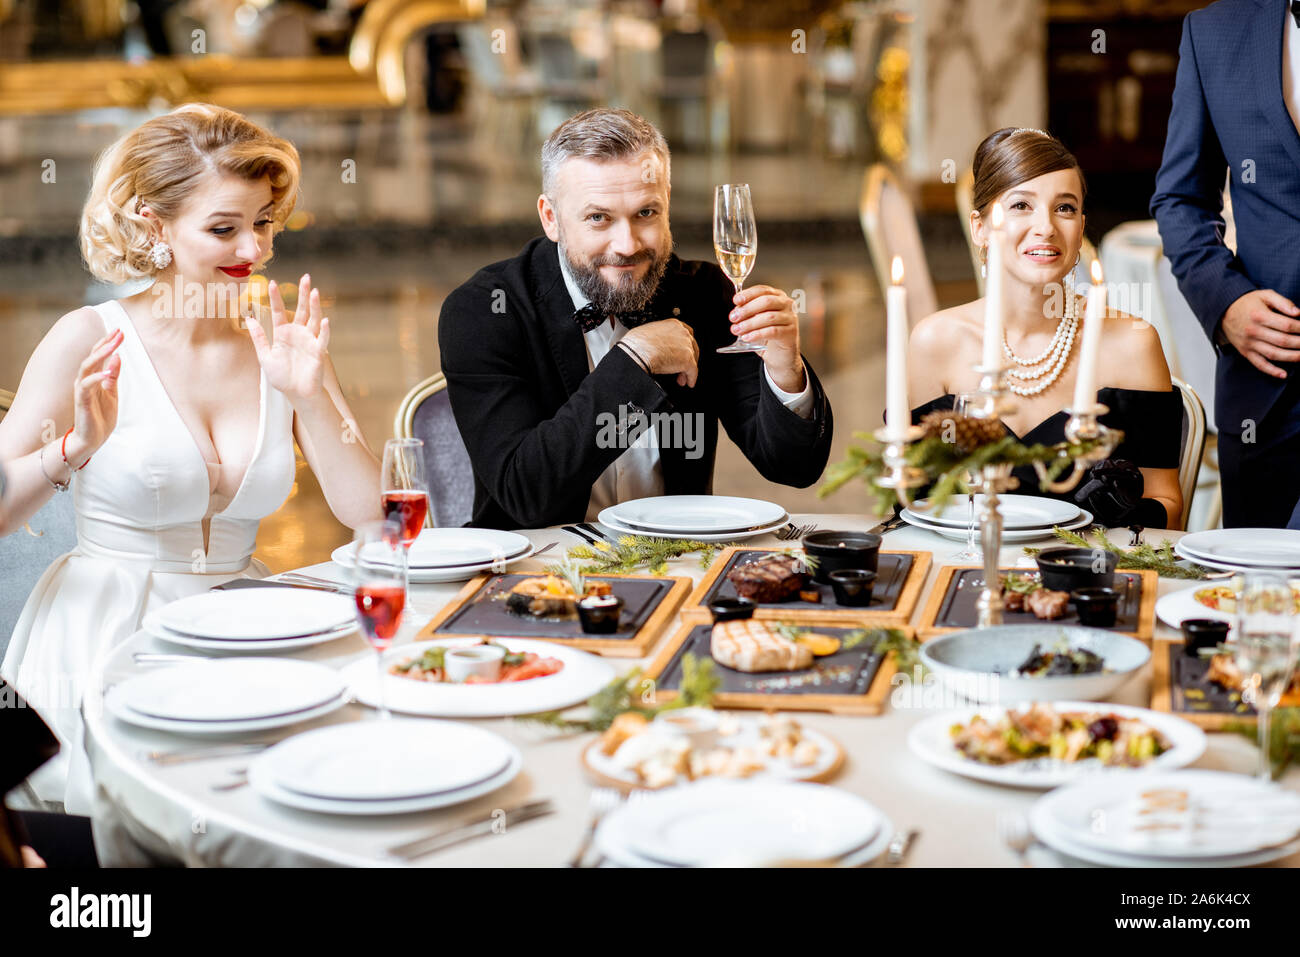 Elegantly dressed group of people having a festive dinner at a well-served table with tasty dishes during New Year Eve at the luxury restaurant Stock Photo